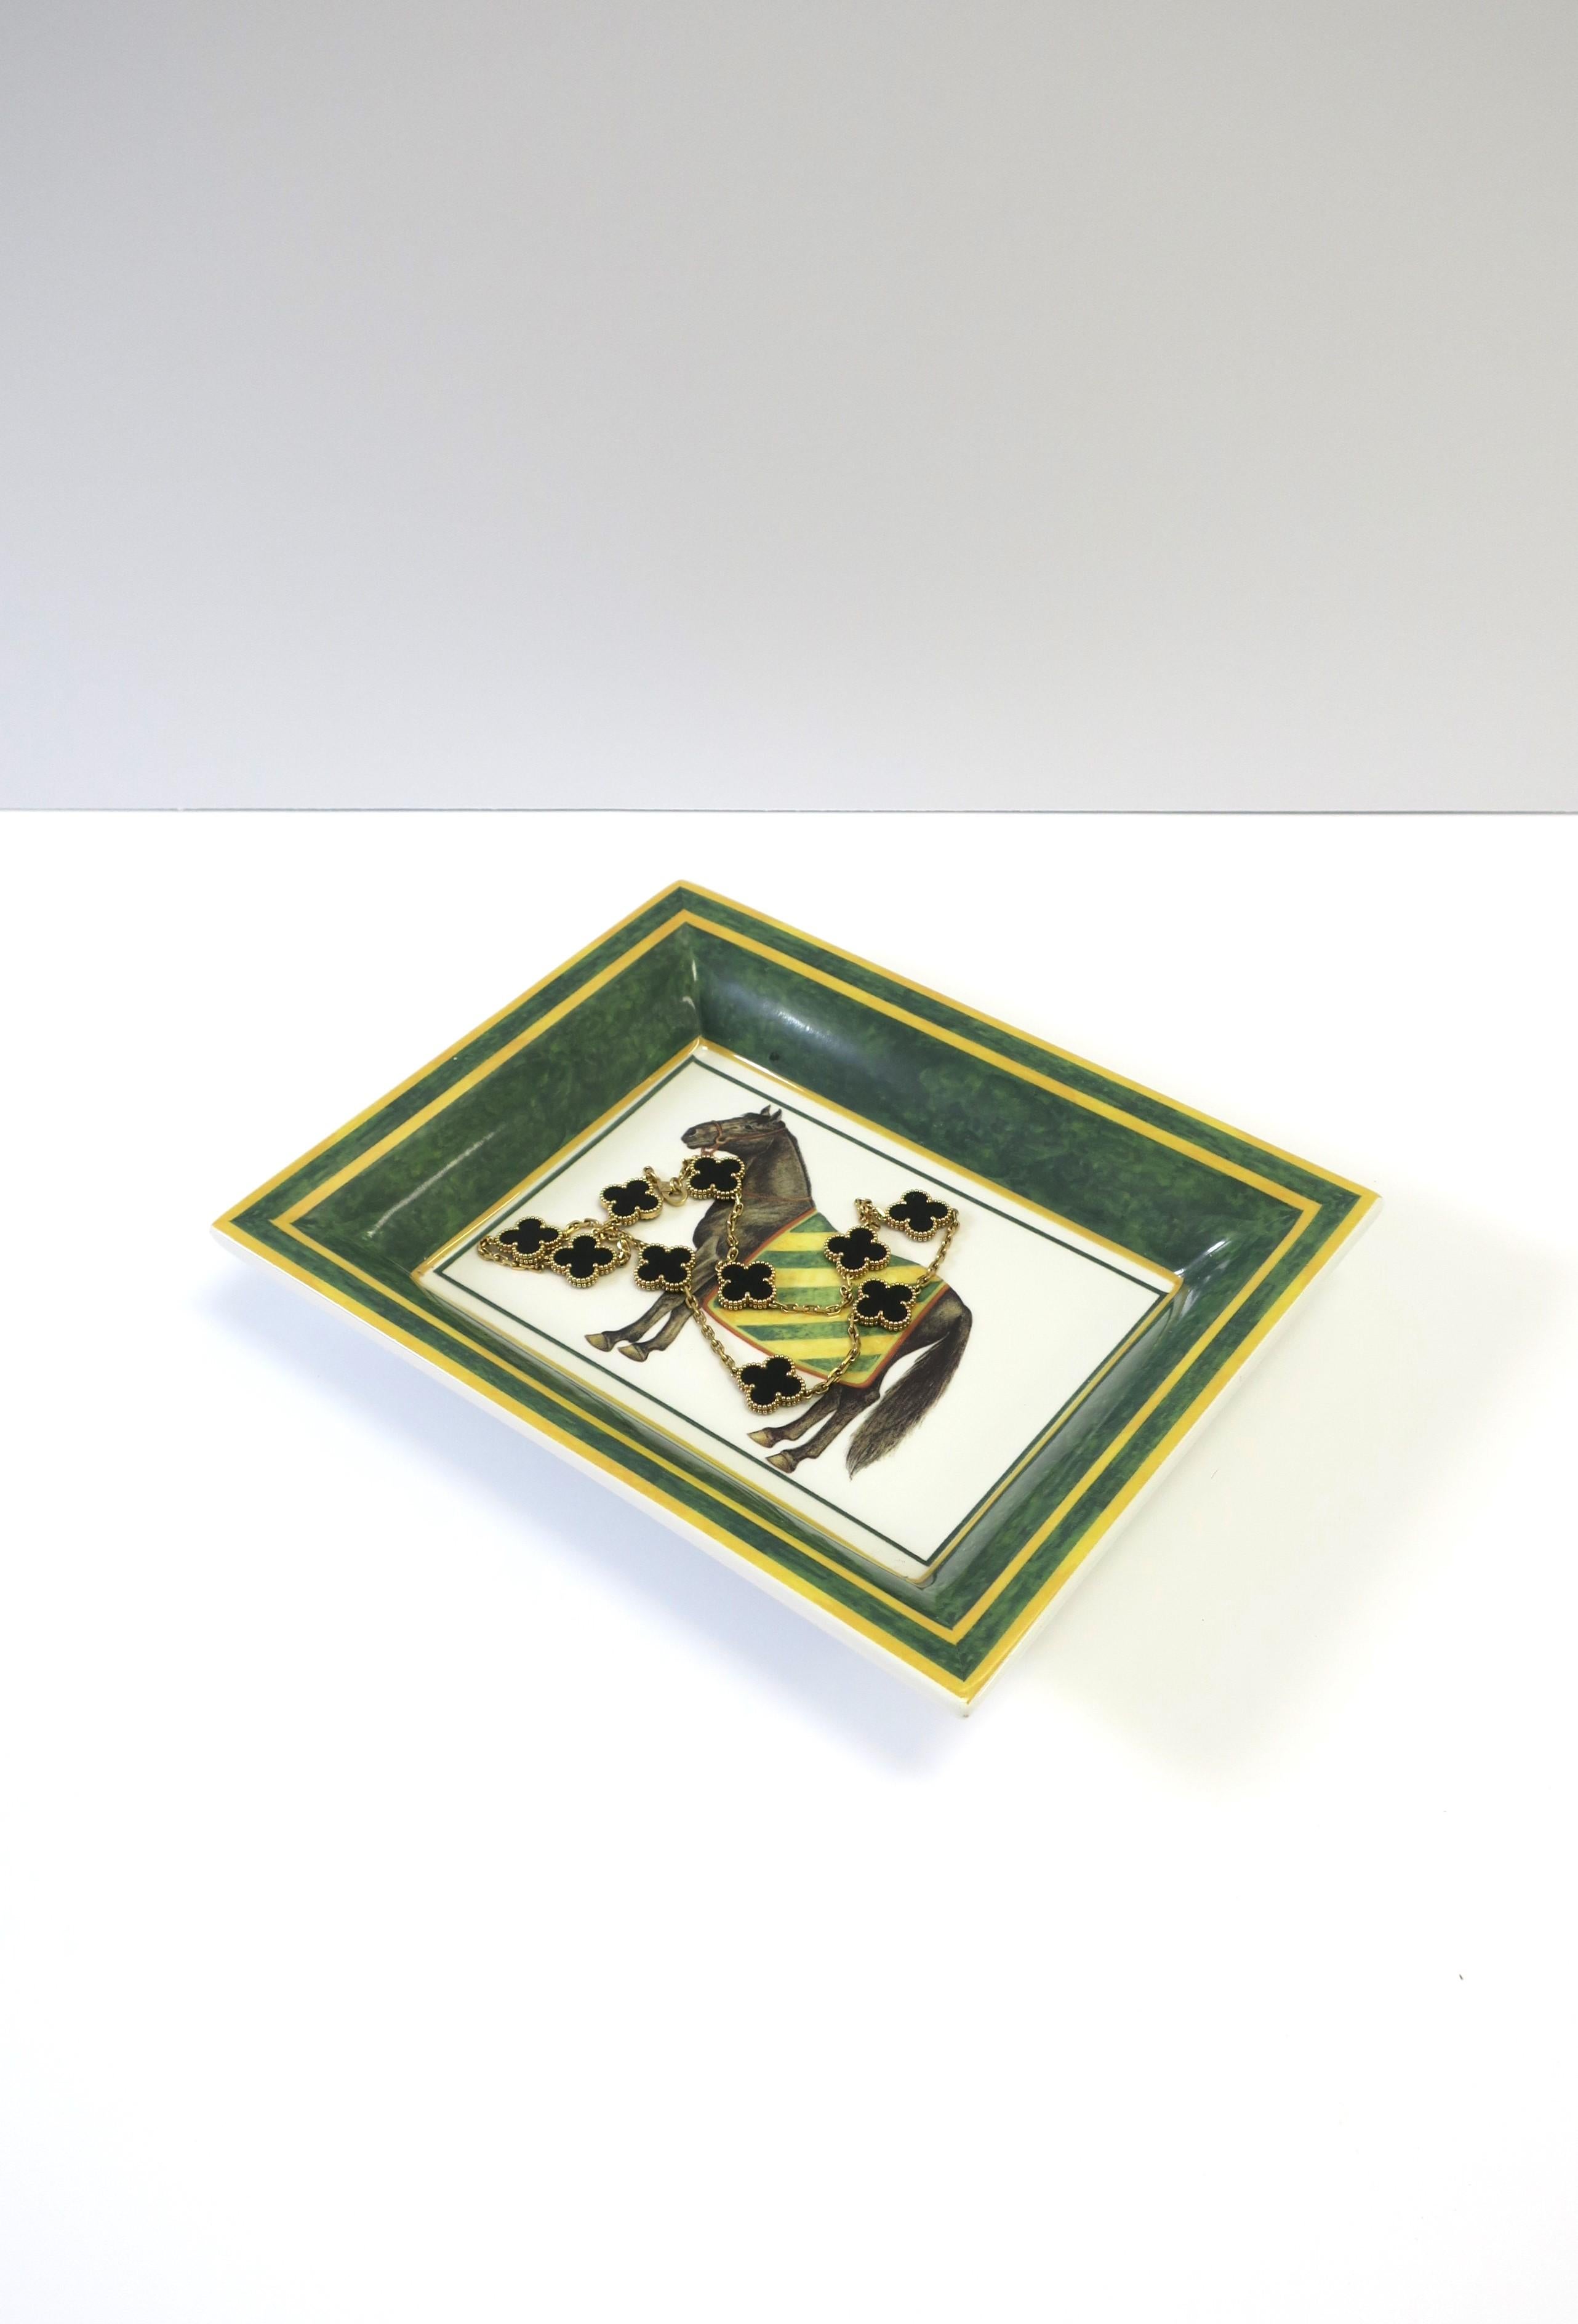 Italian Porcelain Jewelry Tray Dish Vide-Poche Catchall with Horse Design For Sale 1